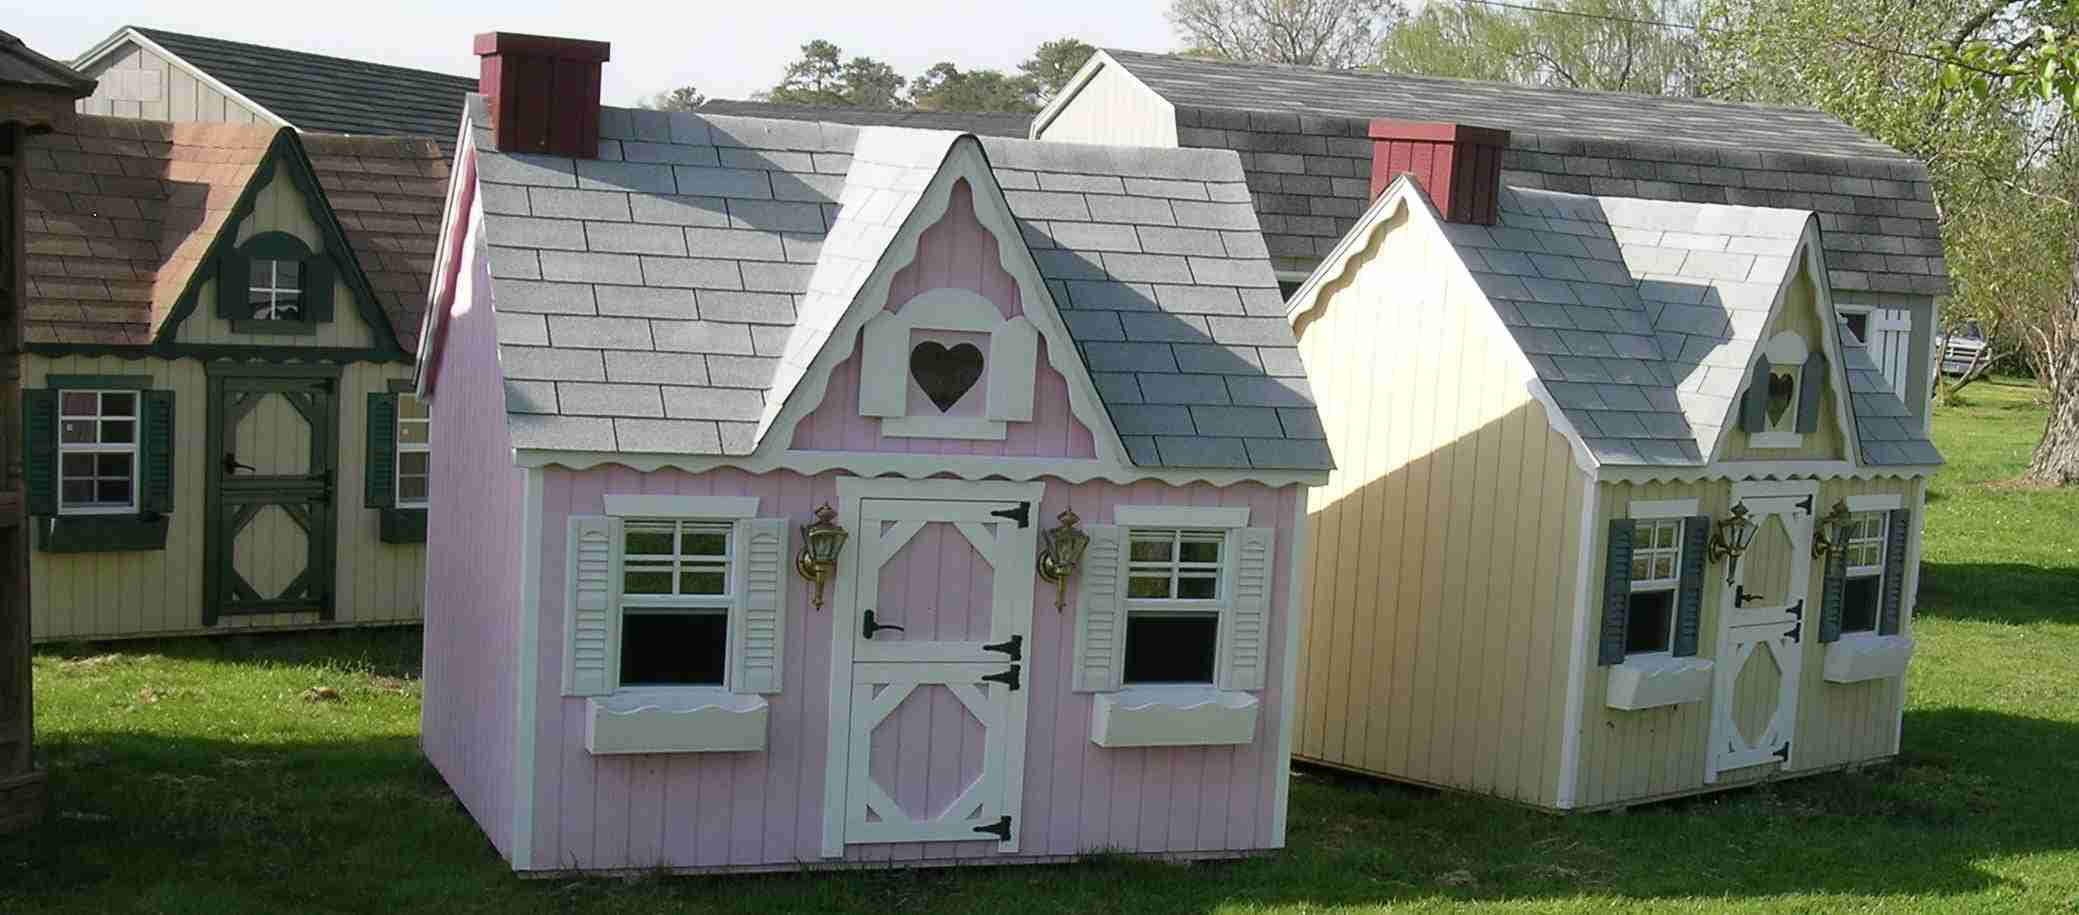 3 Victorian style playhouses with window boxes.